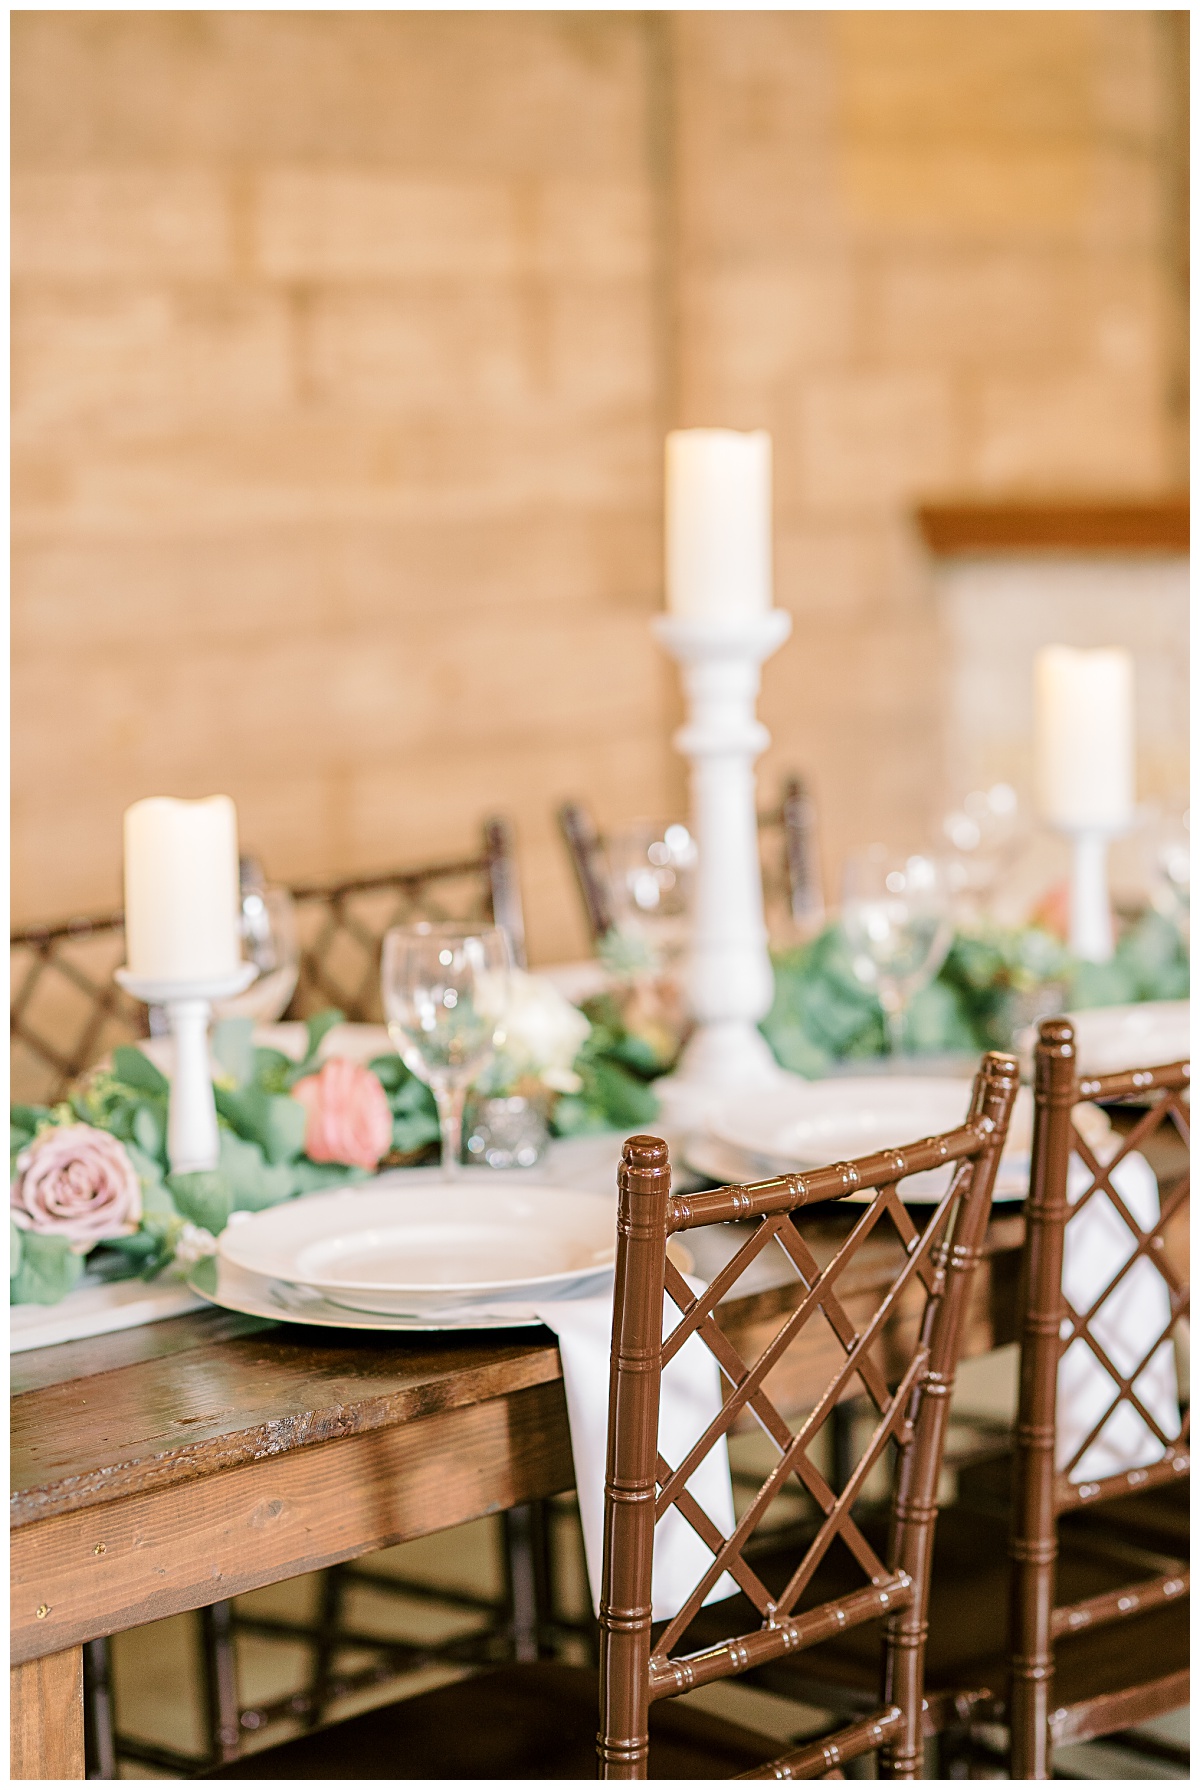 Vintage Candlesticks with greenery garland and soft coral | Alicia Yarrish Photography Wild and Lush Style shoot 